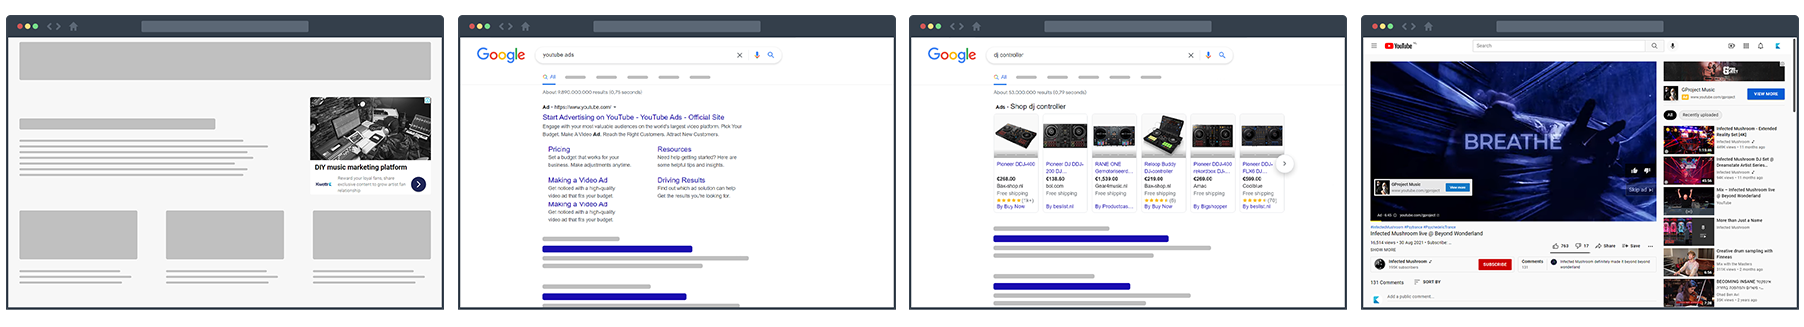 Google Display Ads Google Search Ads Google Shopping Ads YouTube Ads